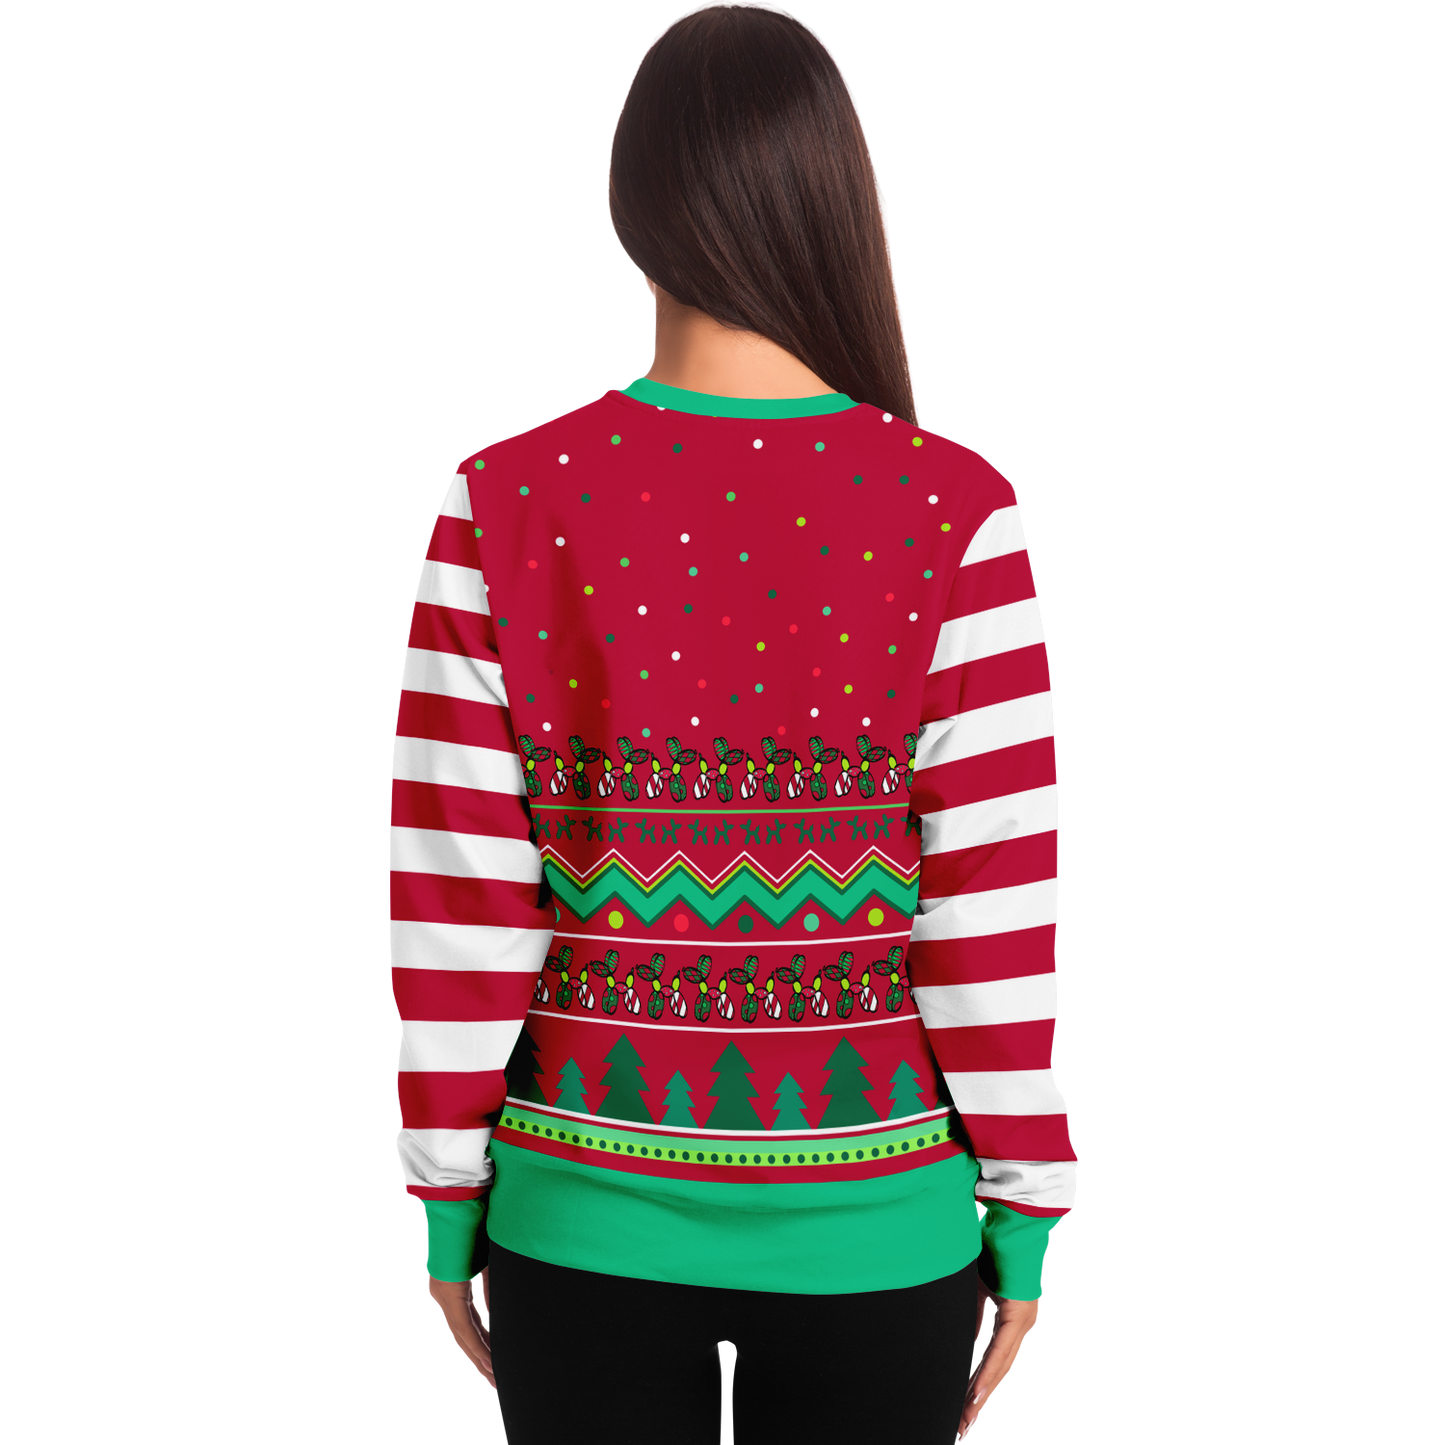 Candy Cane Arms Ugly Christmas Sweater